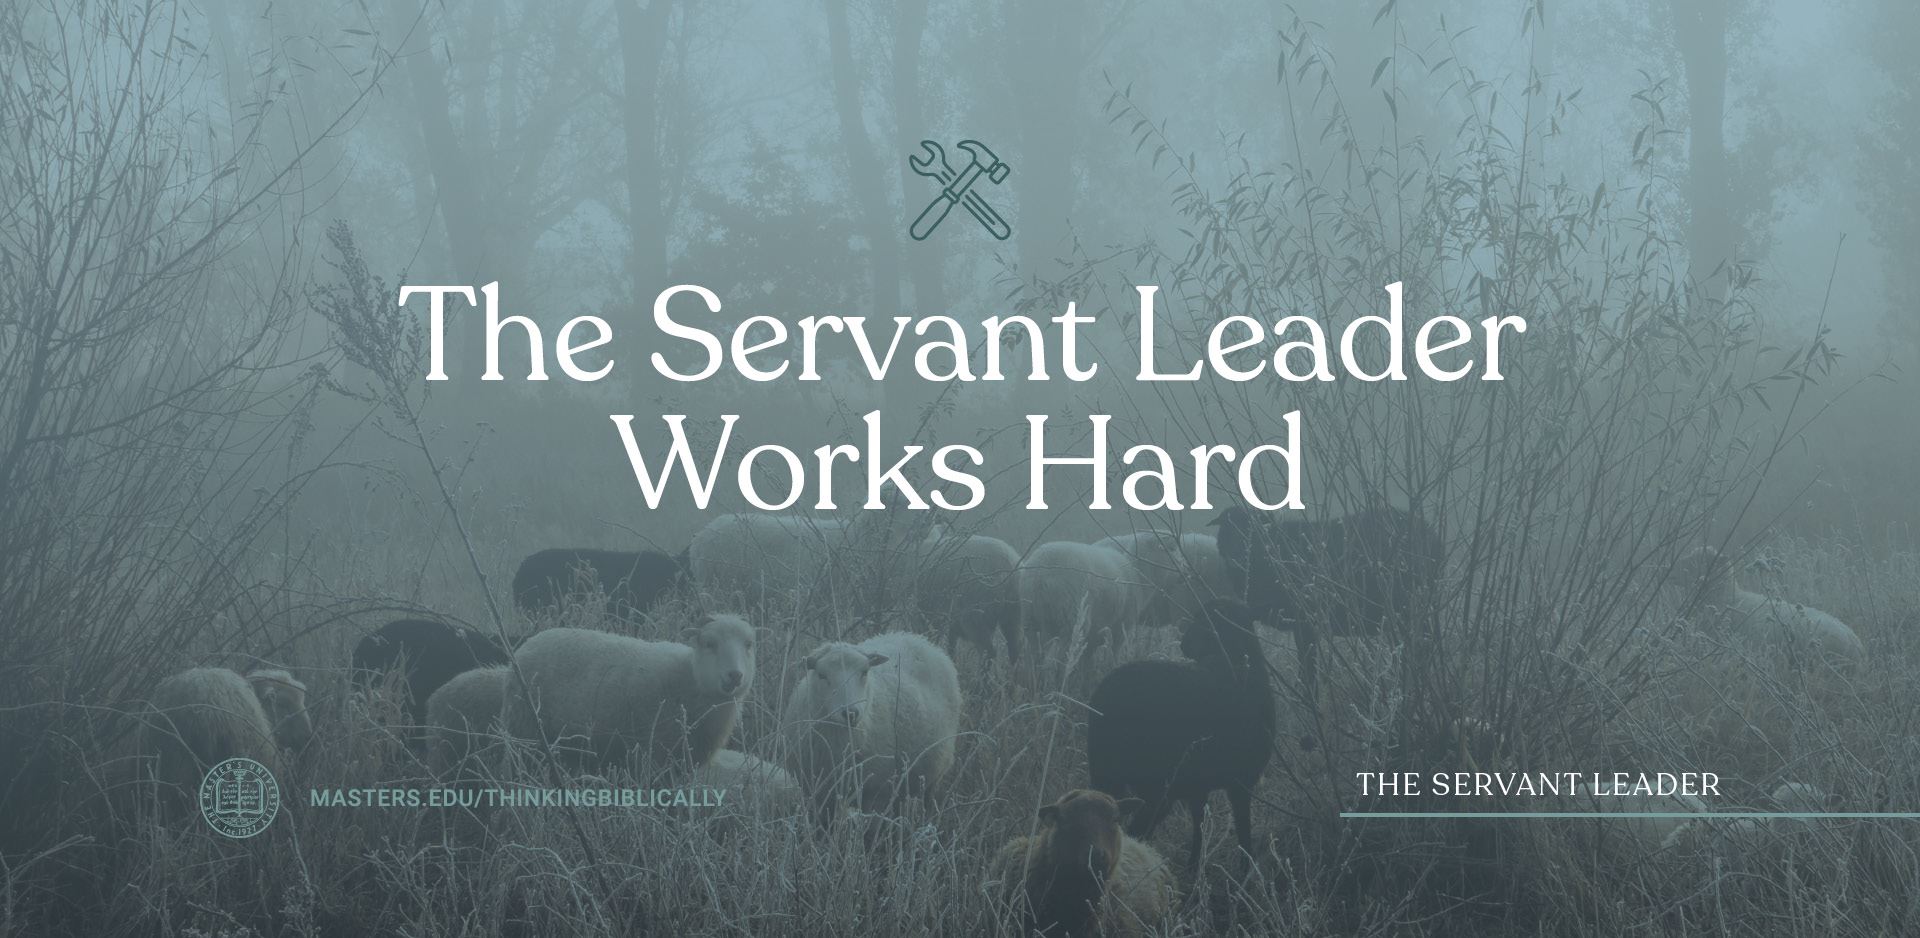 The Servant Leader Works Hard Featured Image